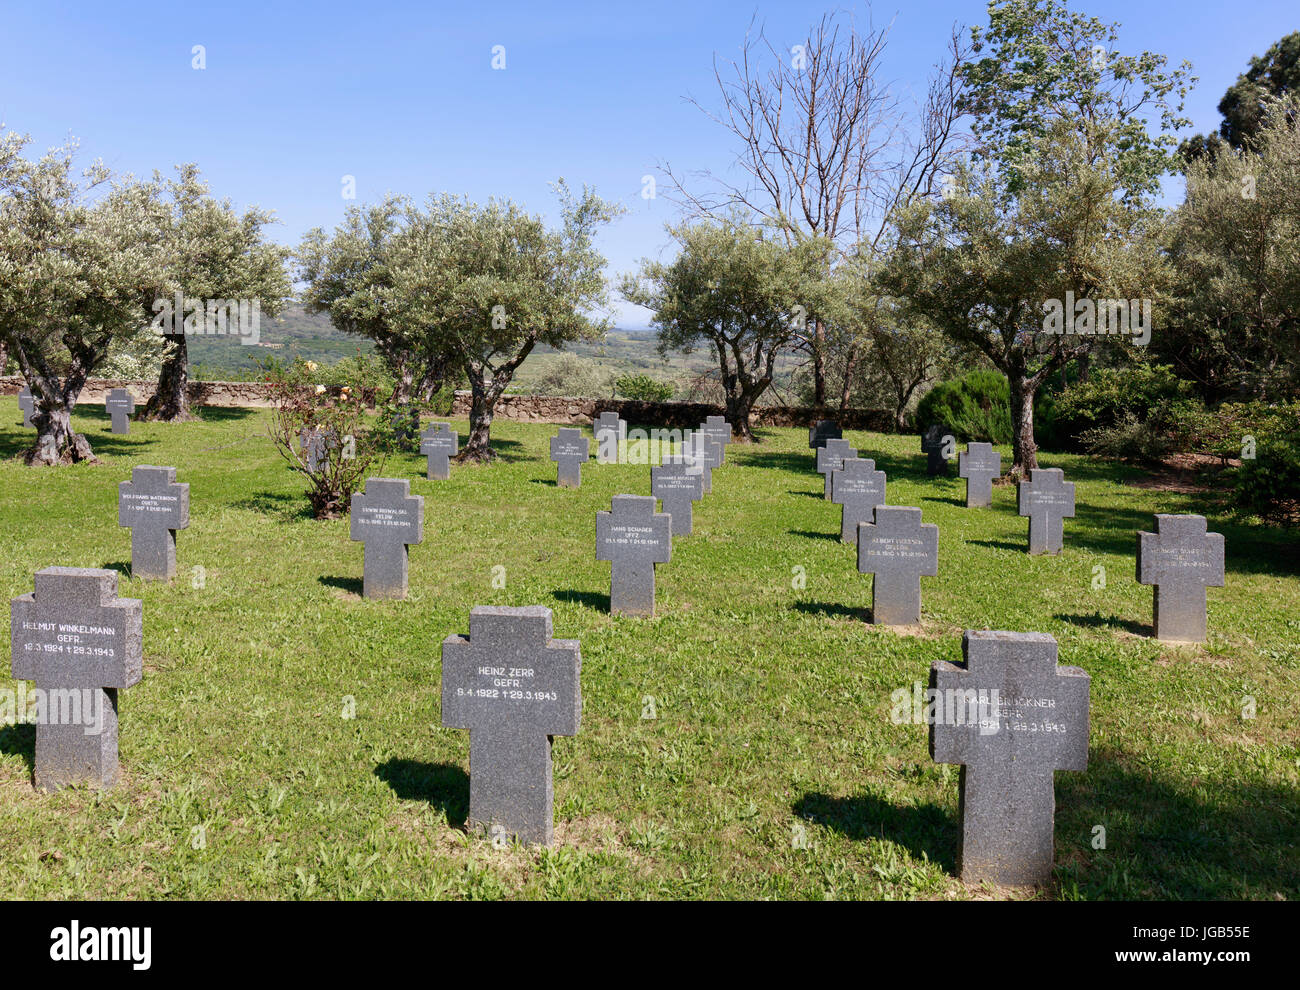 Cuacos de Yuste, Caceres Province, Extremadura, Spain.  German military cemetery.  26 dead from the First World War and 154 from the Second World War  Stock Photo